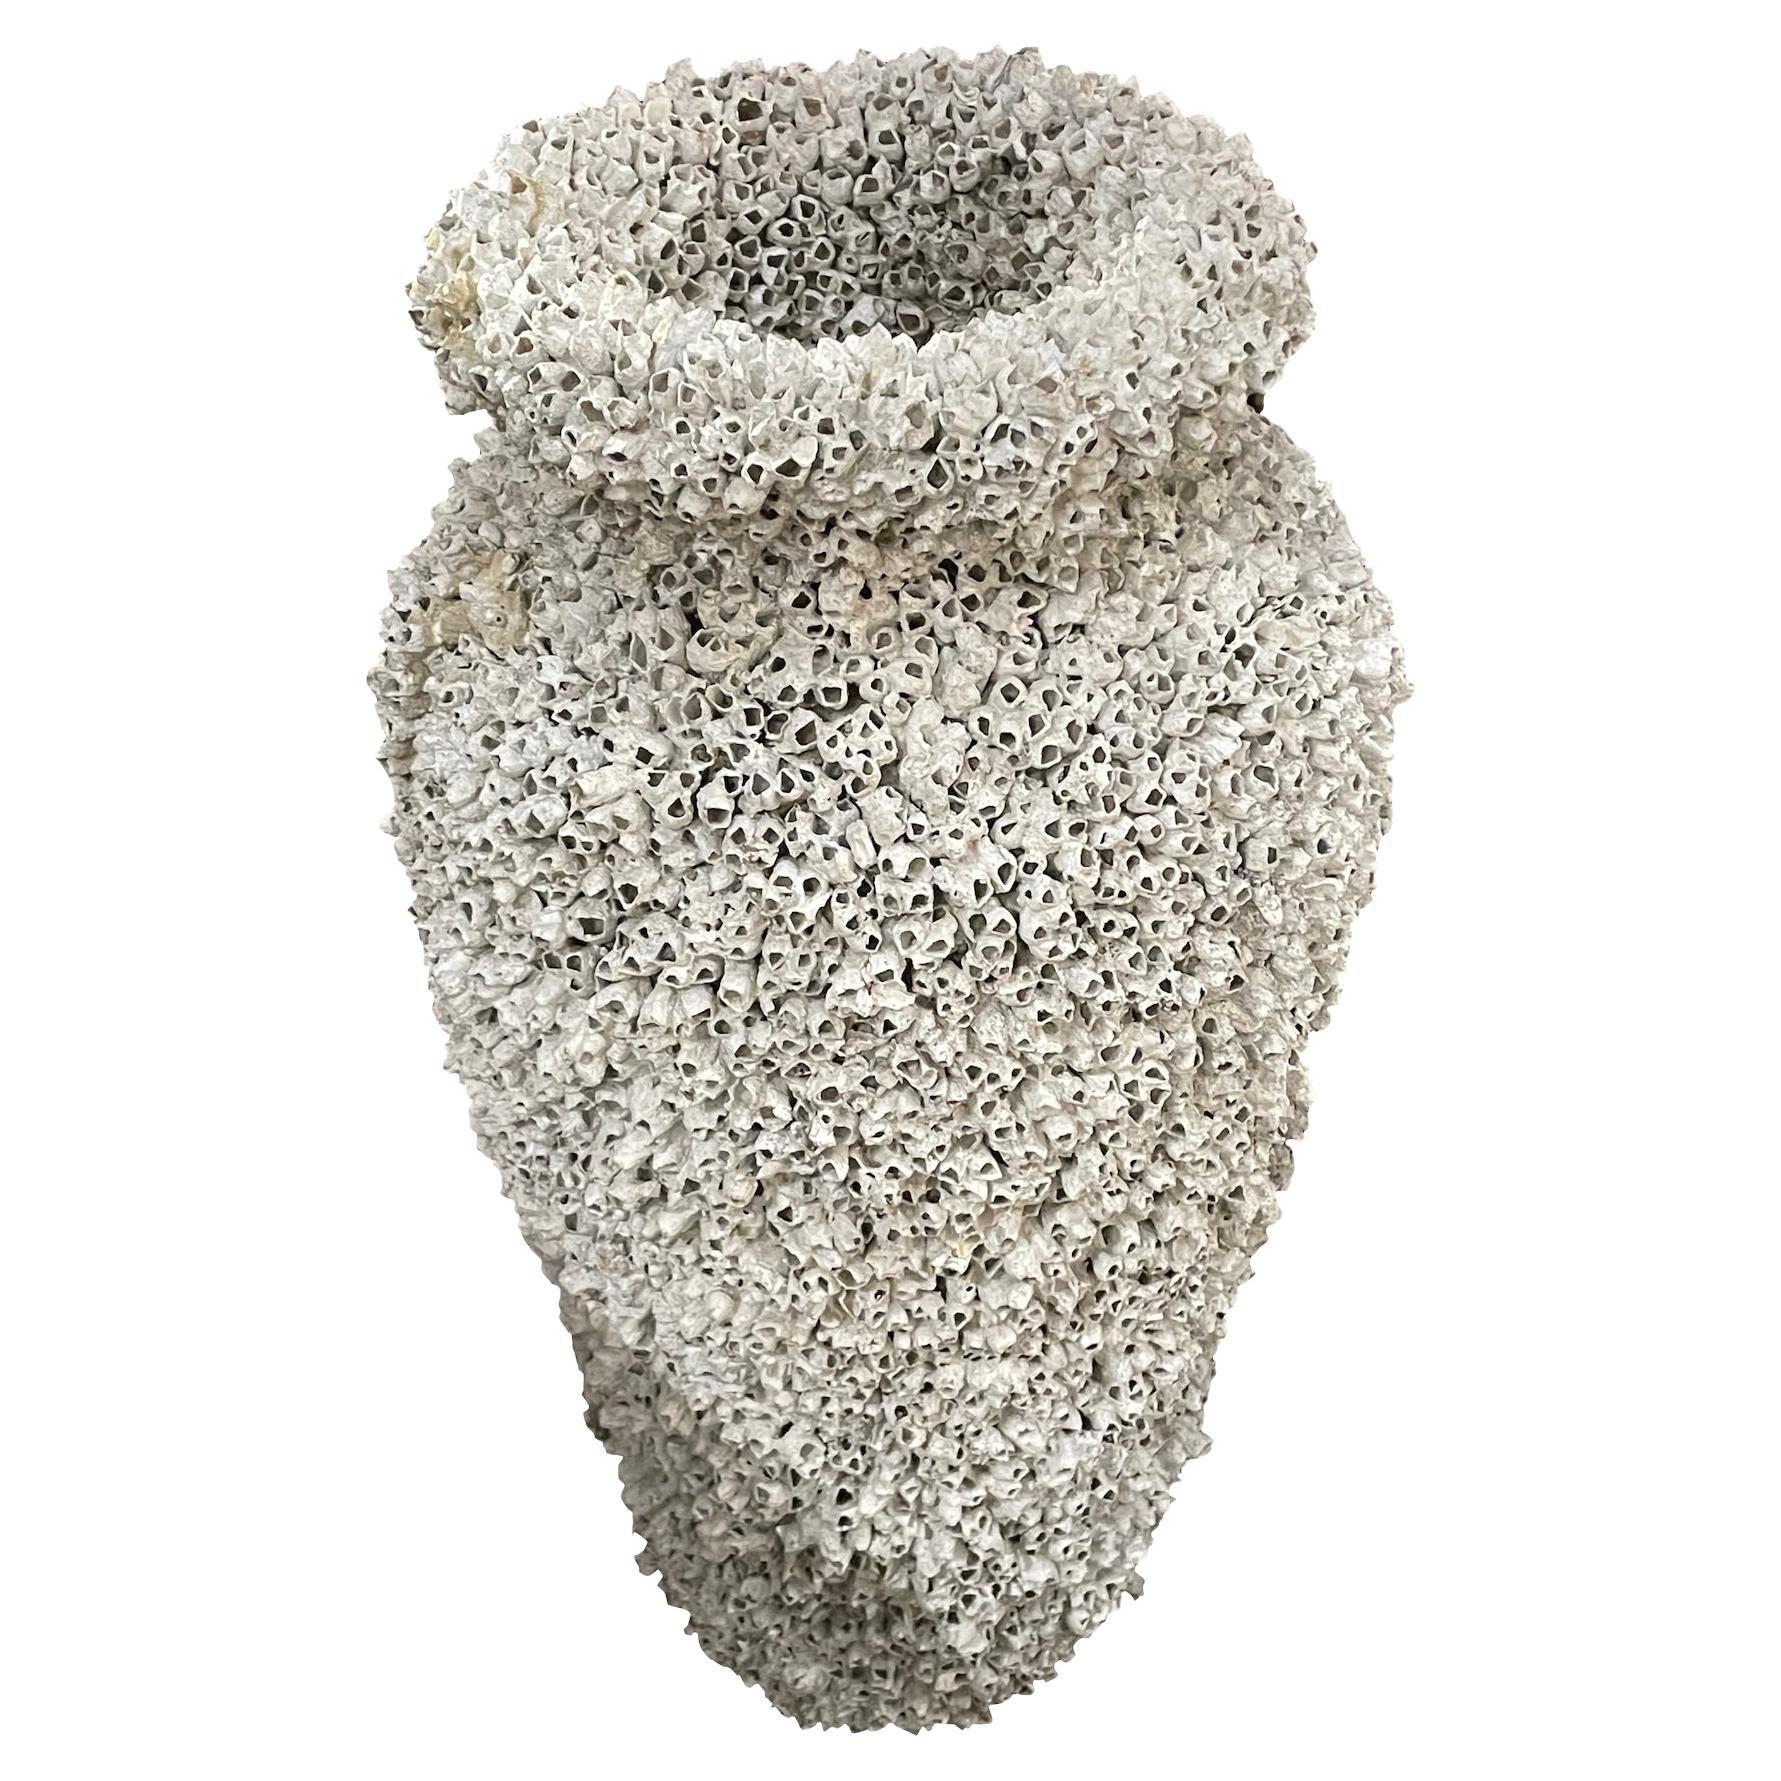 1950s Italian composition stone pot covered in snails.
Tall Classic shape.
Can be used indoor or outdoors.
Part of a collection of other snail covered pots in different sizes and shapes.
ARRIVING APRIL.